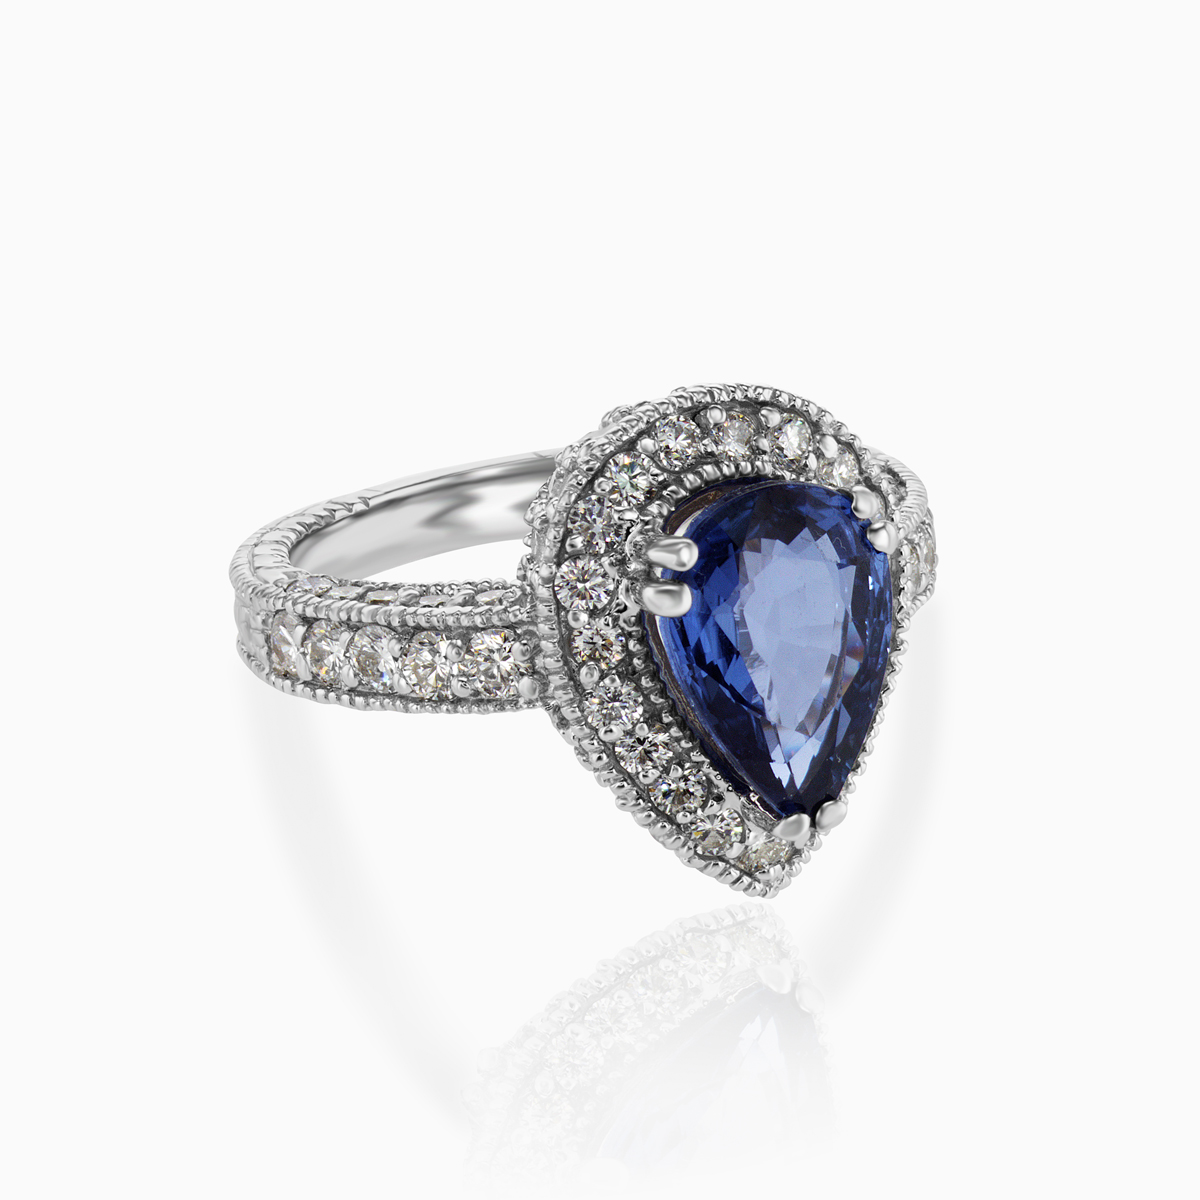 Pear-shaped Natural Blue Sapphire and Diamond Halo Engagement Ring